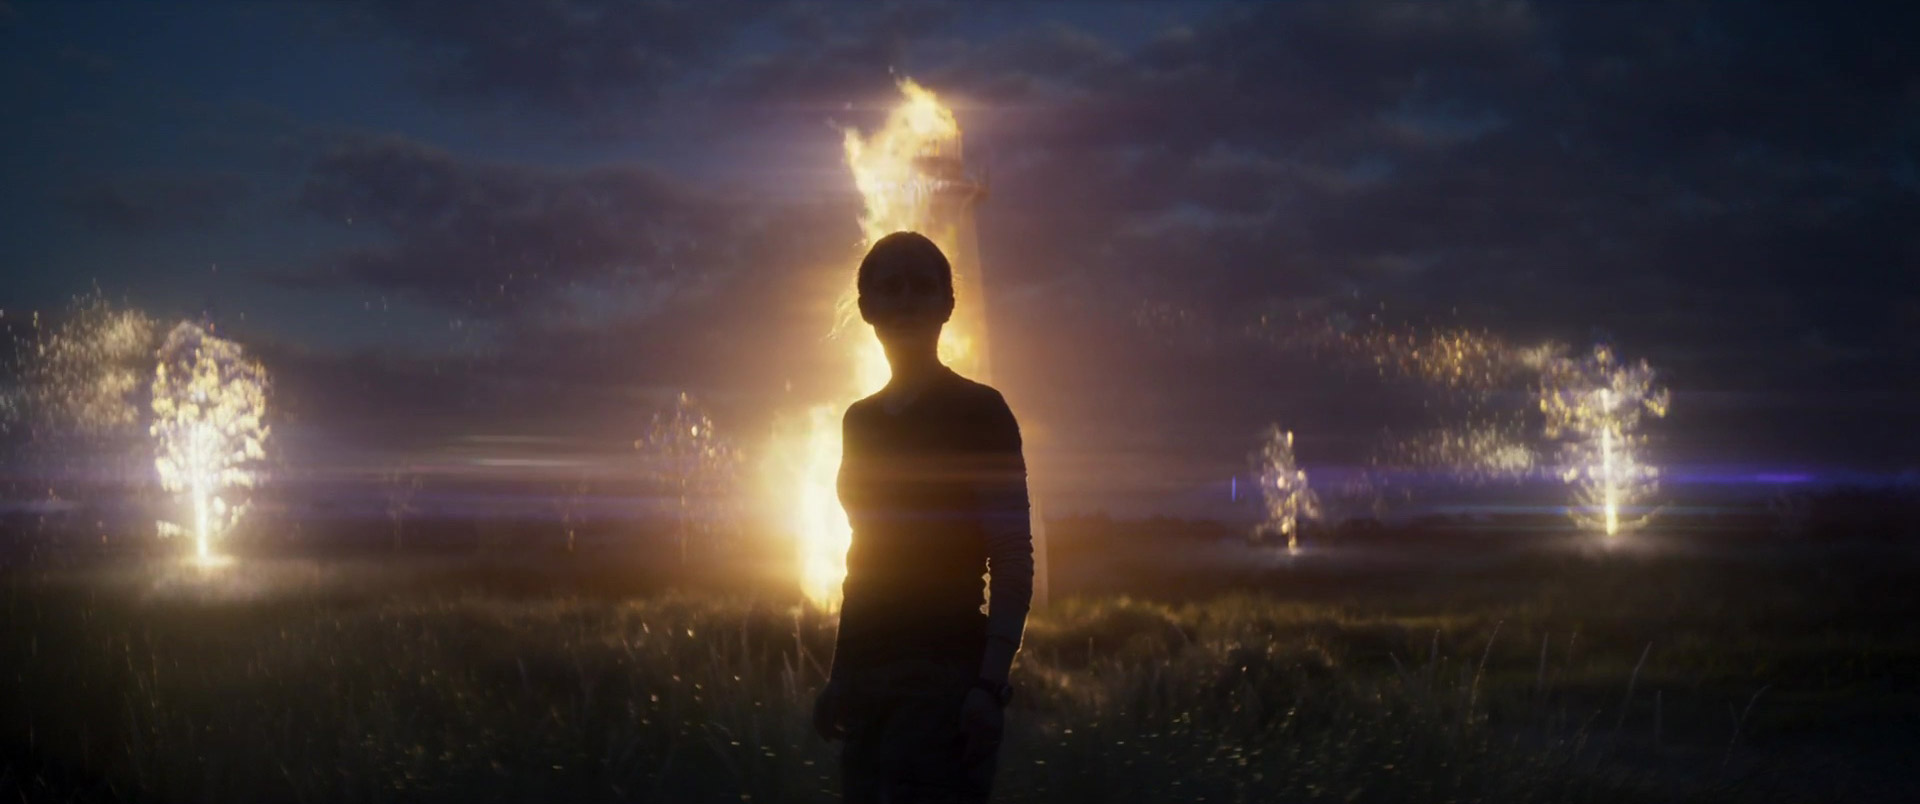 Screenshot from the movie adaptation of Annihilation, directed by Alex Garland